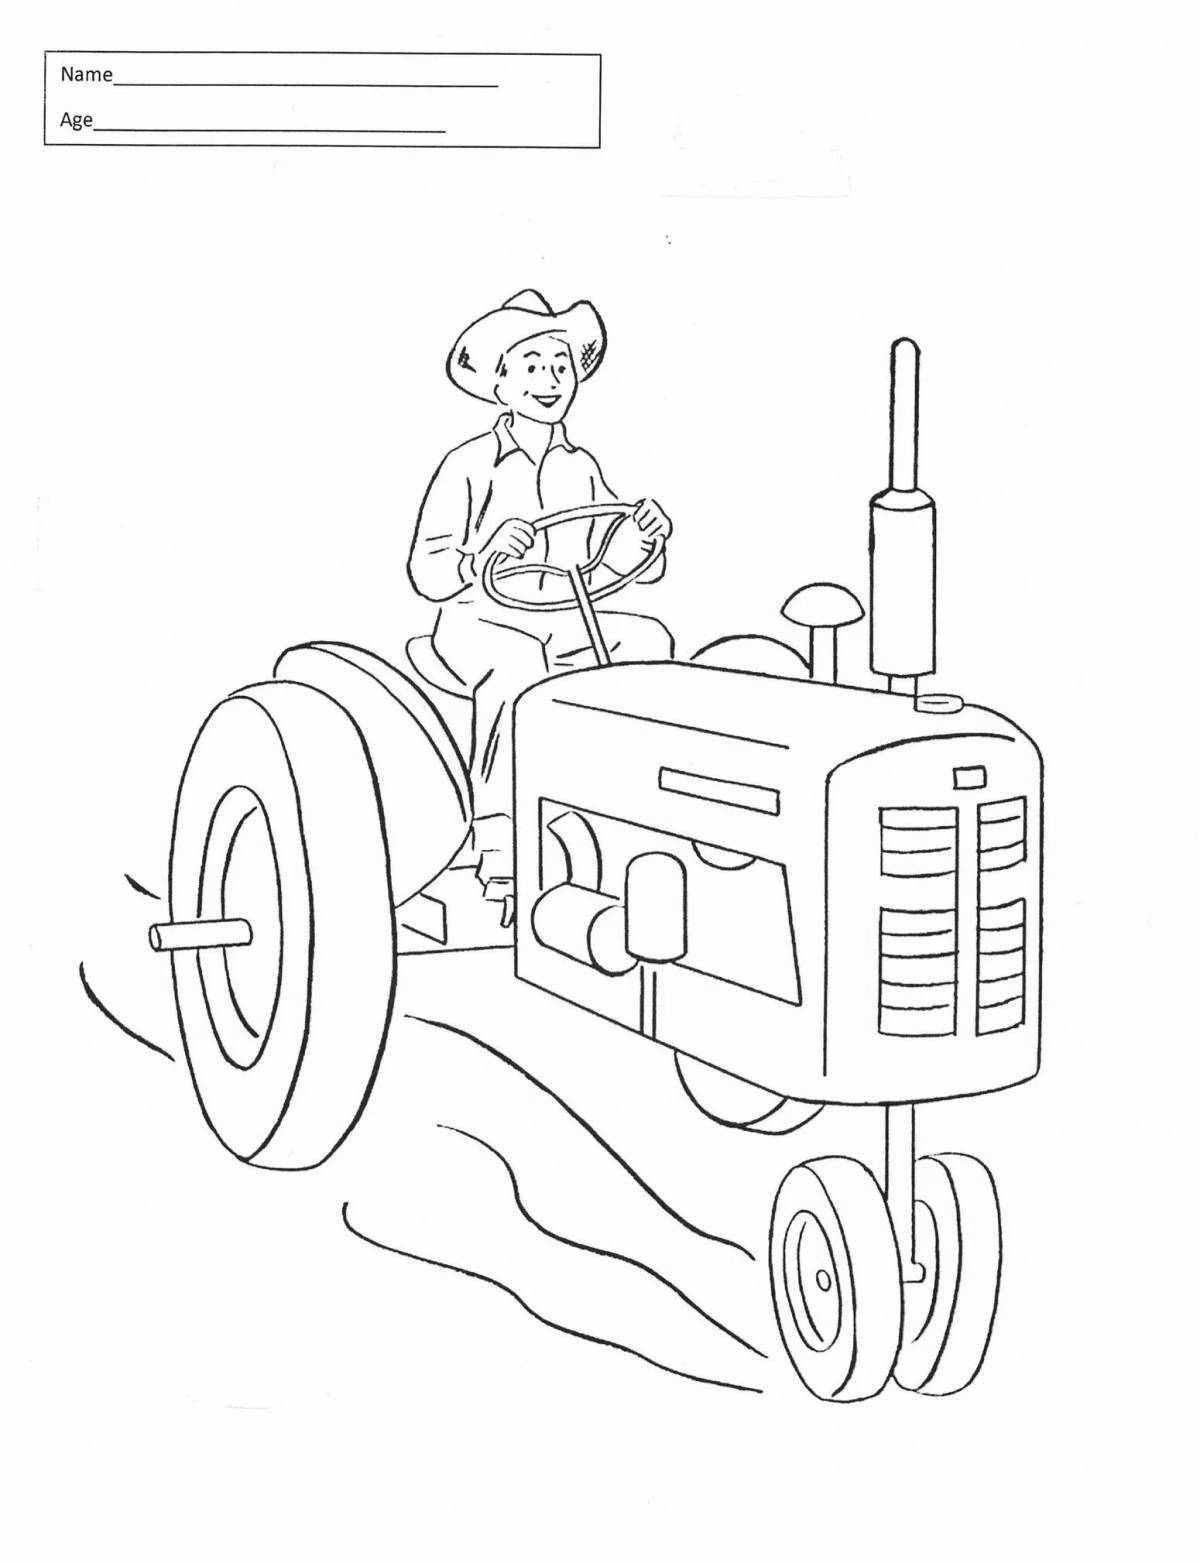 Shiny racing tractor coloring page